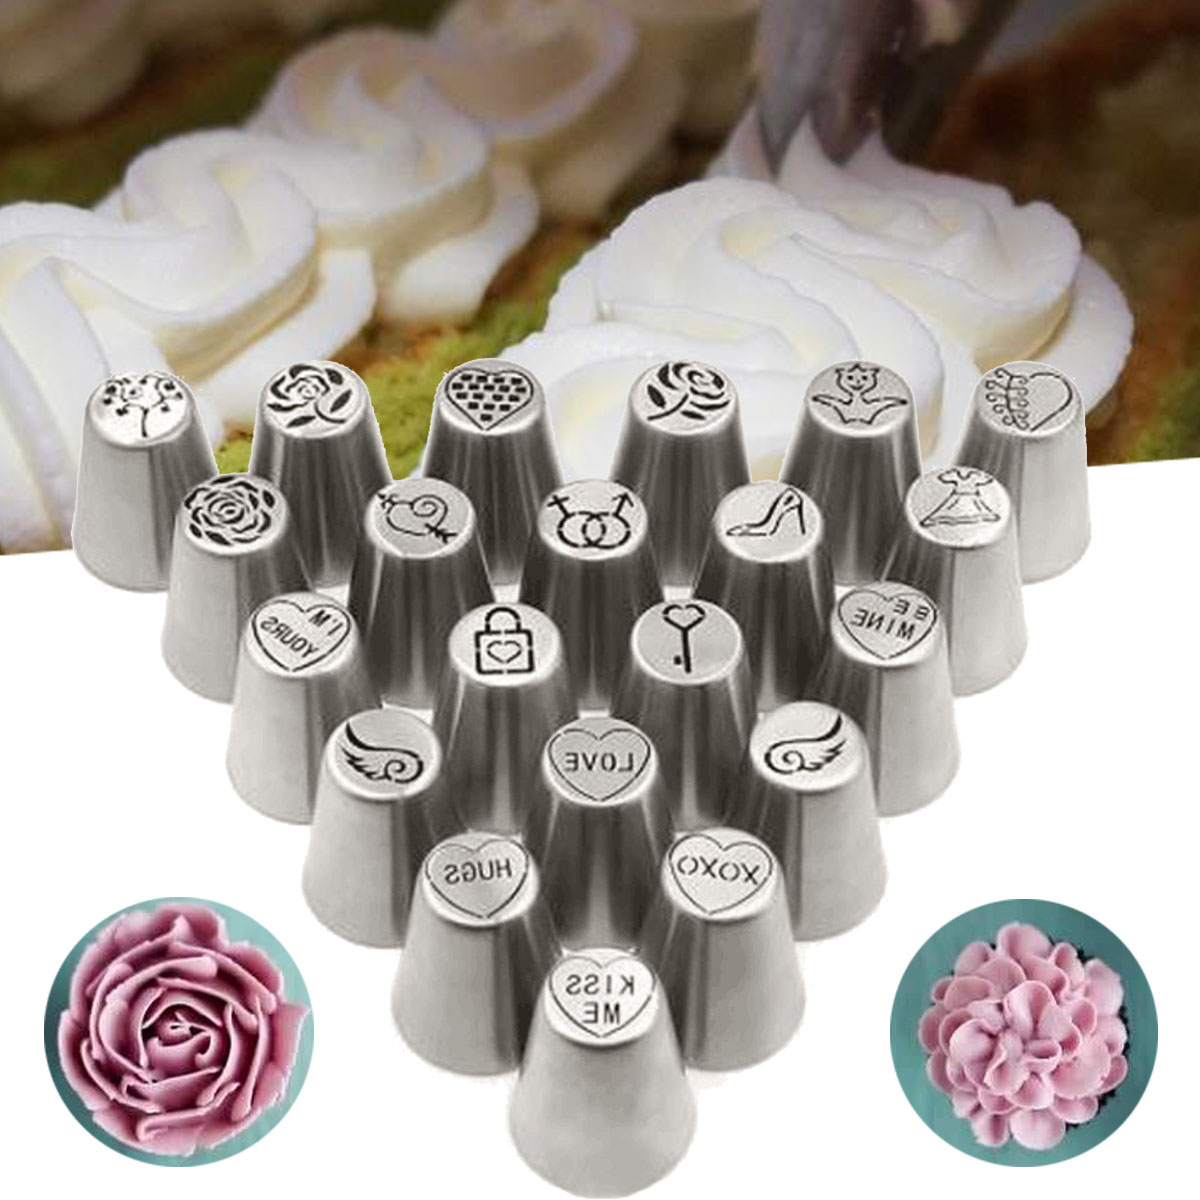 

21 Pcs Set Valentine's Day Icing Piping Nozzles Tips Cake Decorating Icing Piping Nozzle